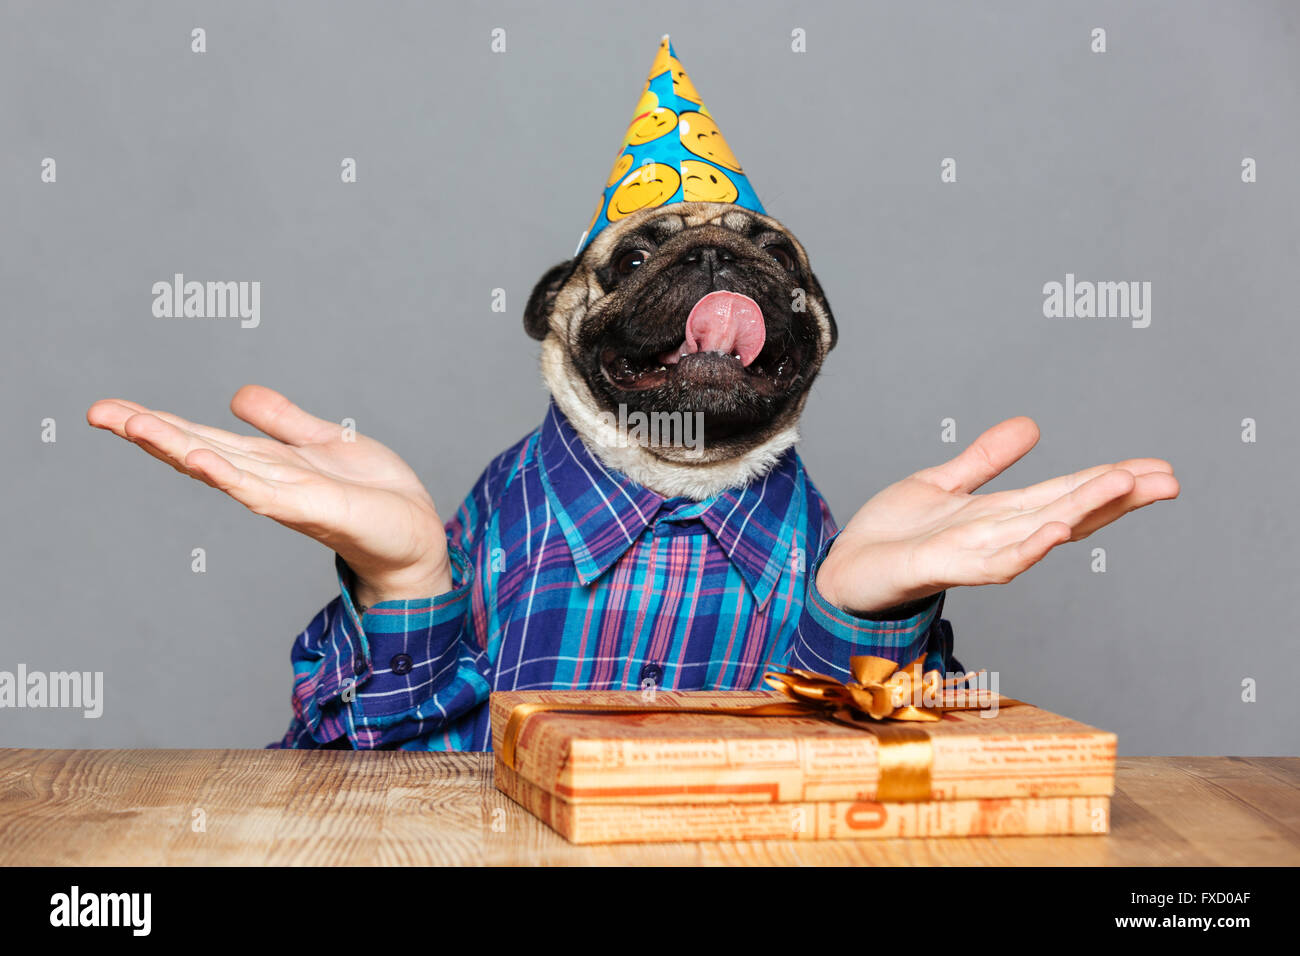 Adorable man with pug dog head in birthday hat holding copyspace on palms over grey background Stock Photo